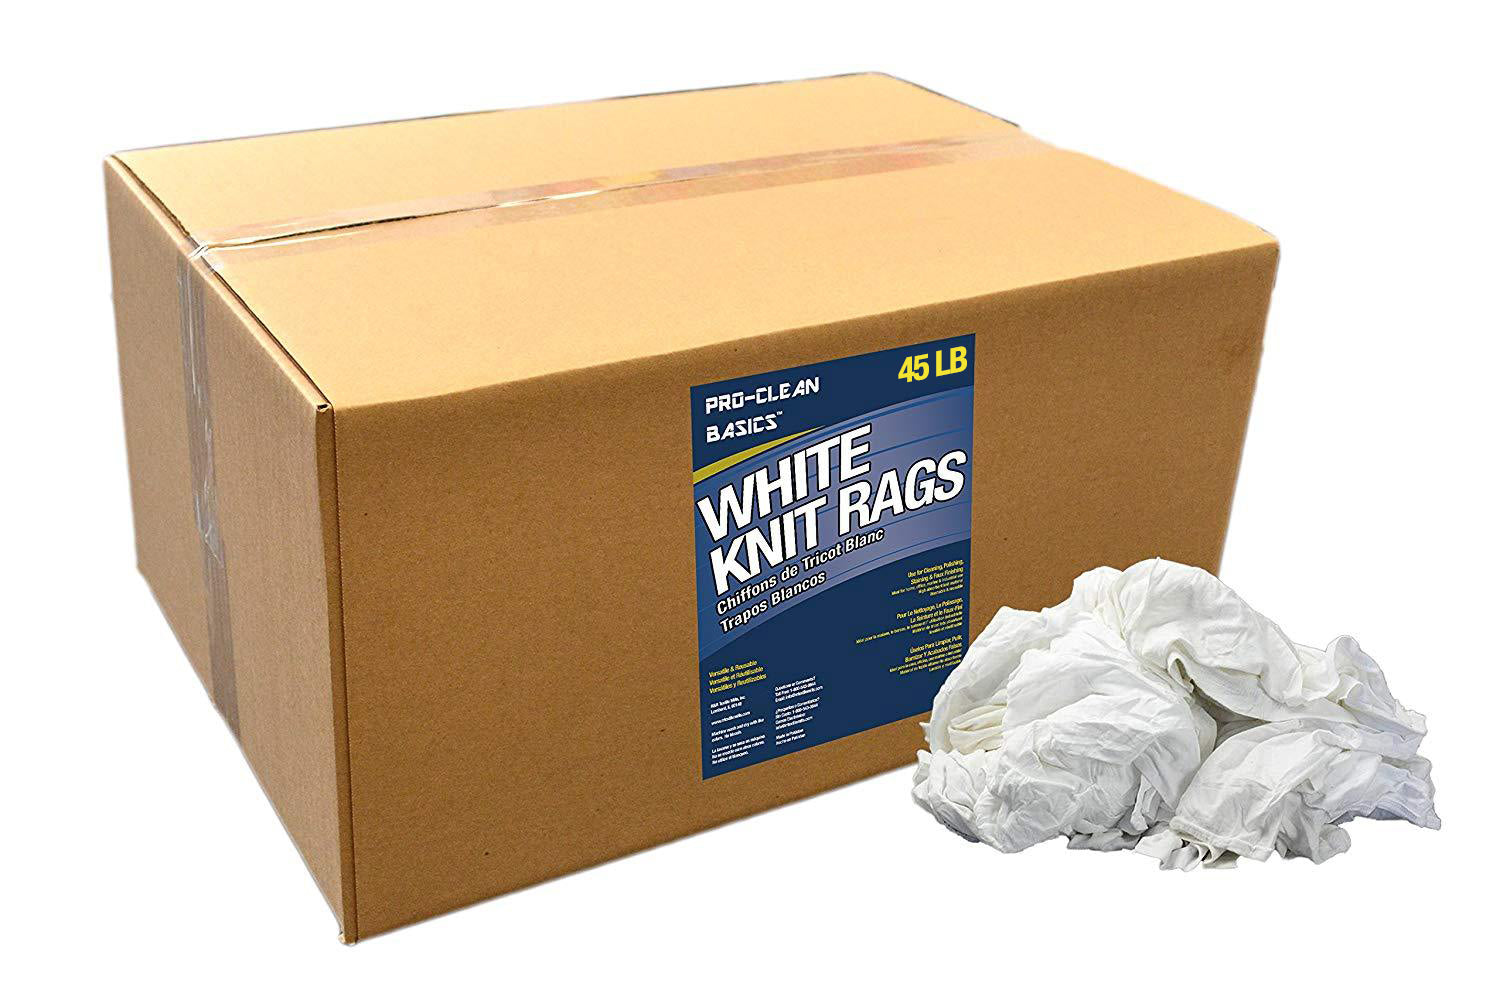 Pro-Clean Basics Select:  New Mixed White T-Shirt Rags